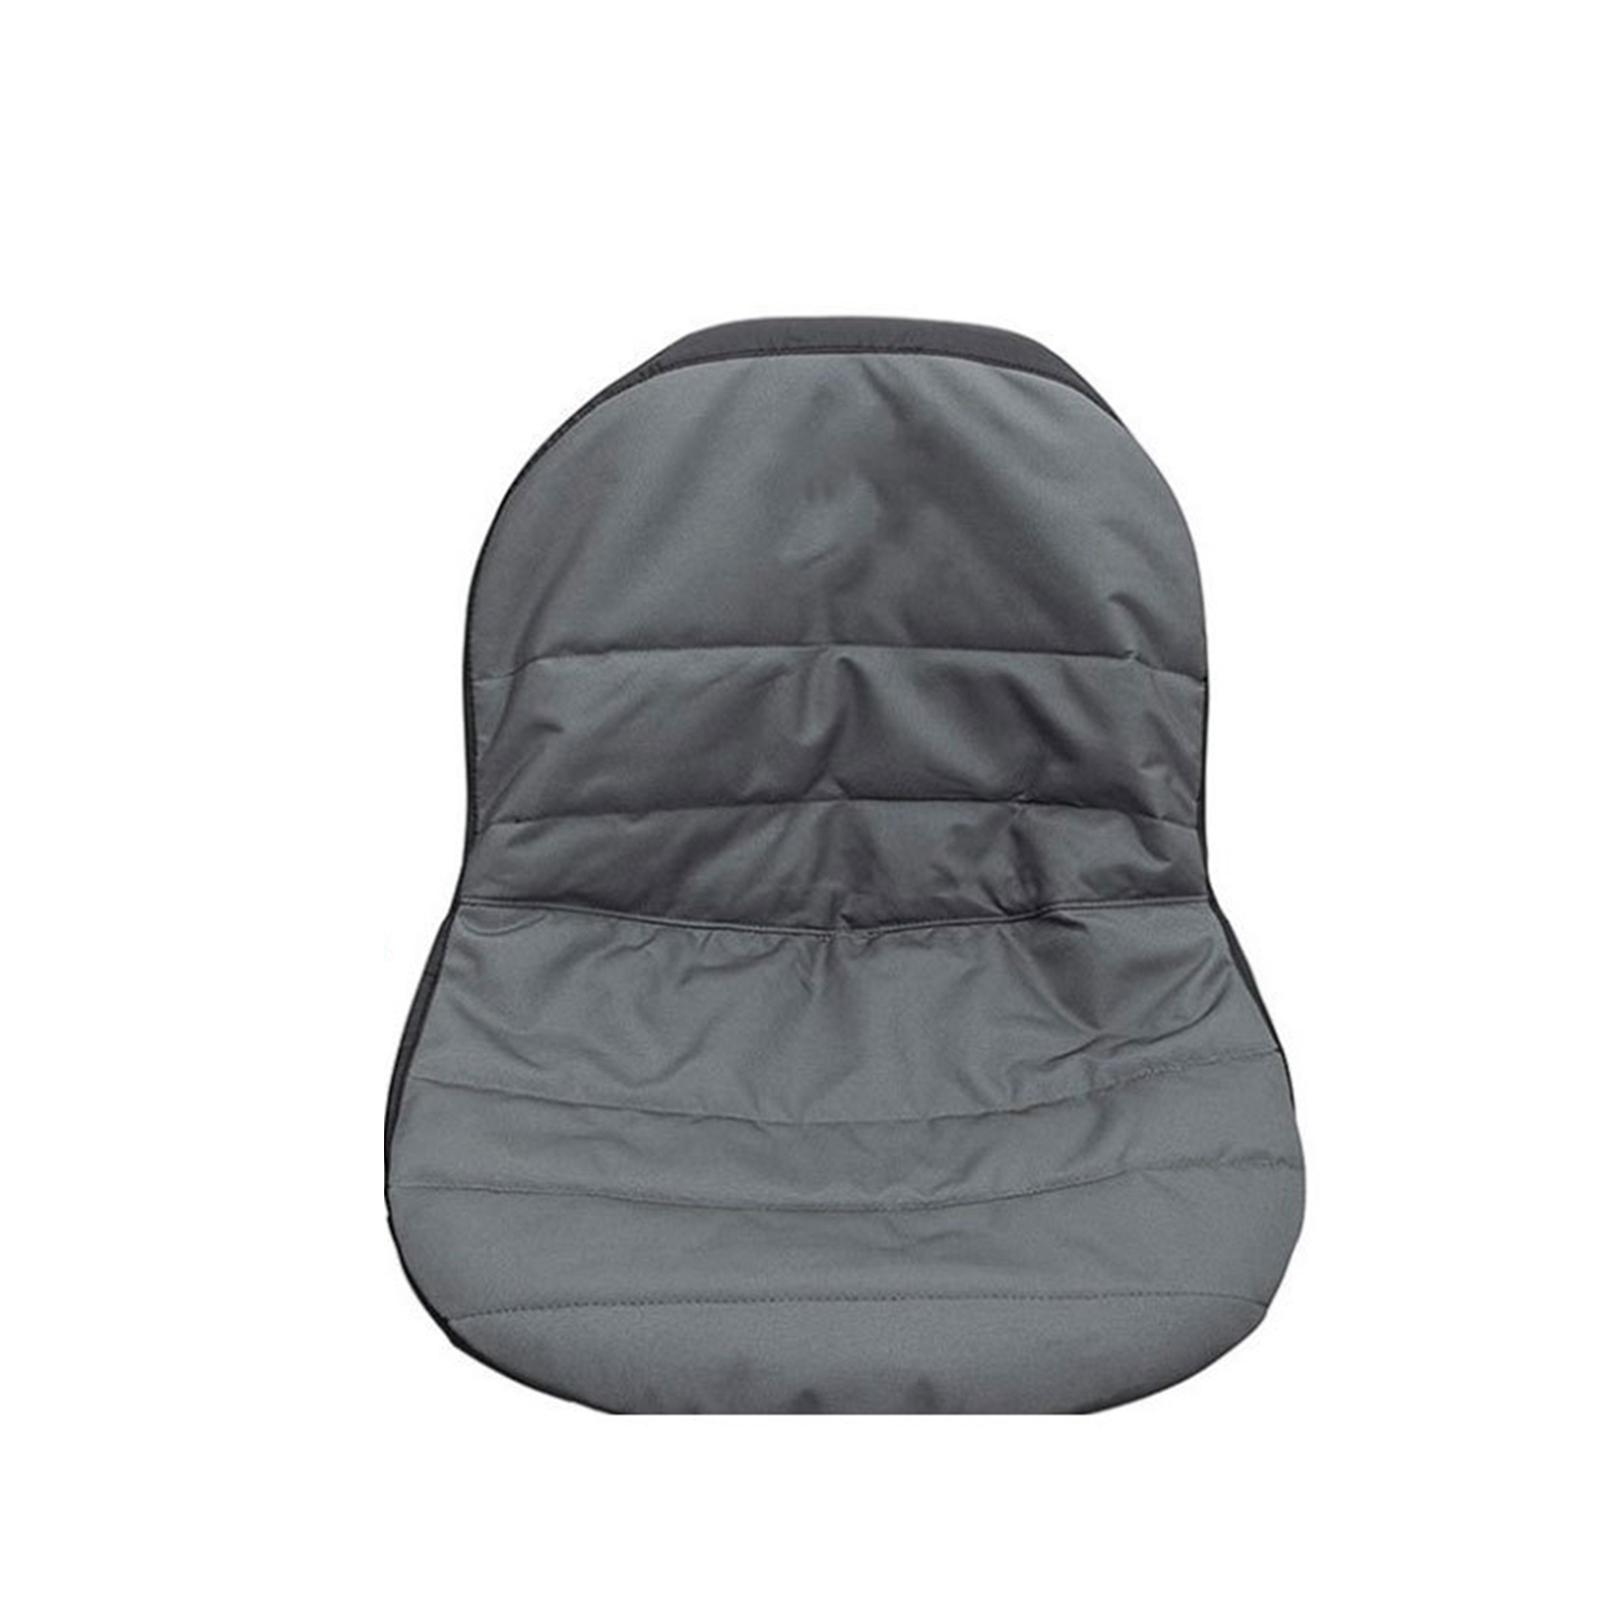 TOMTOP JMS Lawn Mower Seat Cover Tractor Seat Cover Heavy Duty Padded 600D Oxford Material Grey